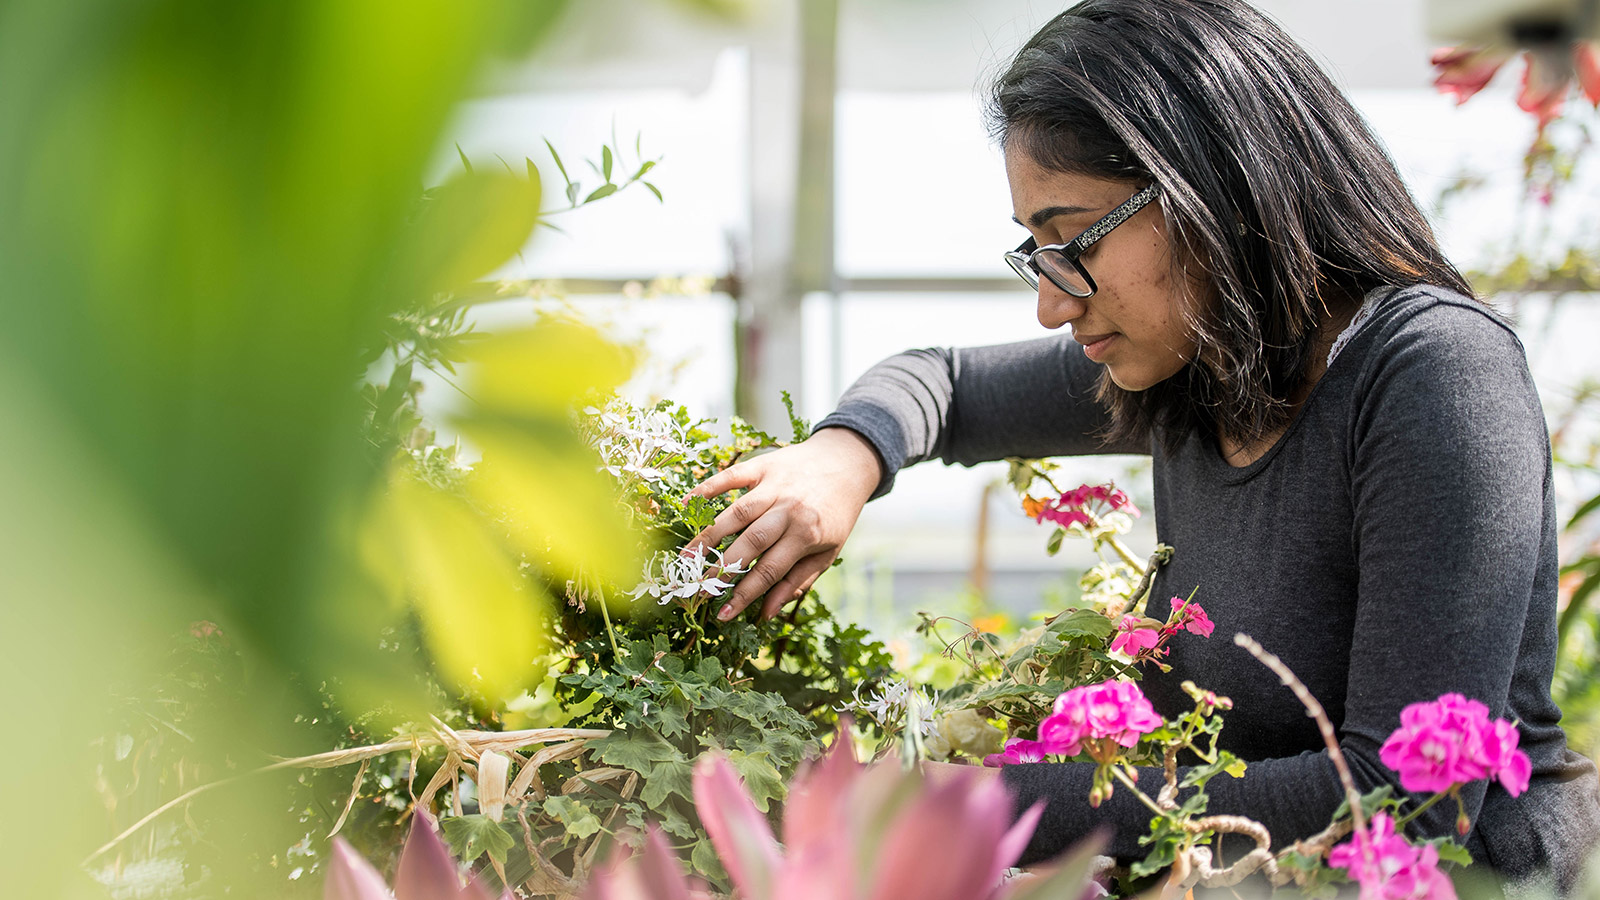 student looking at plants inside a greenhouse